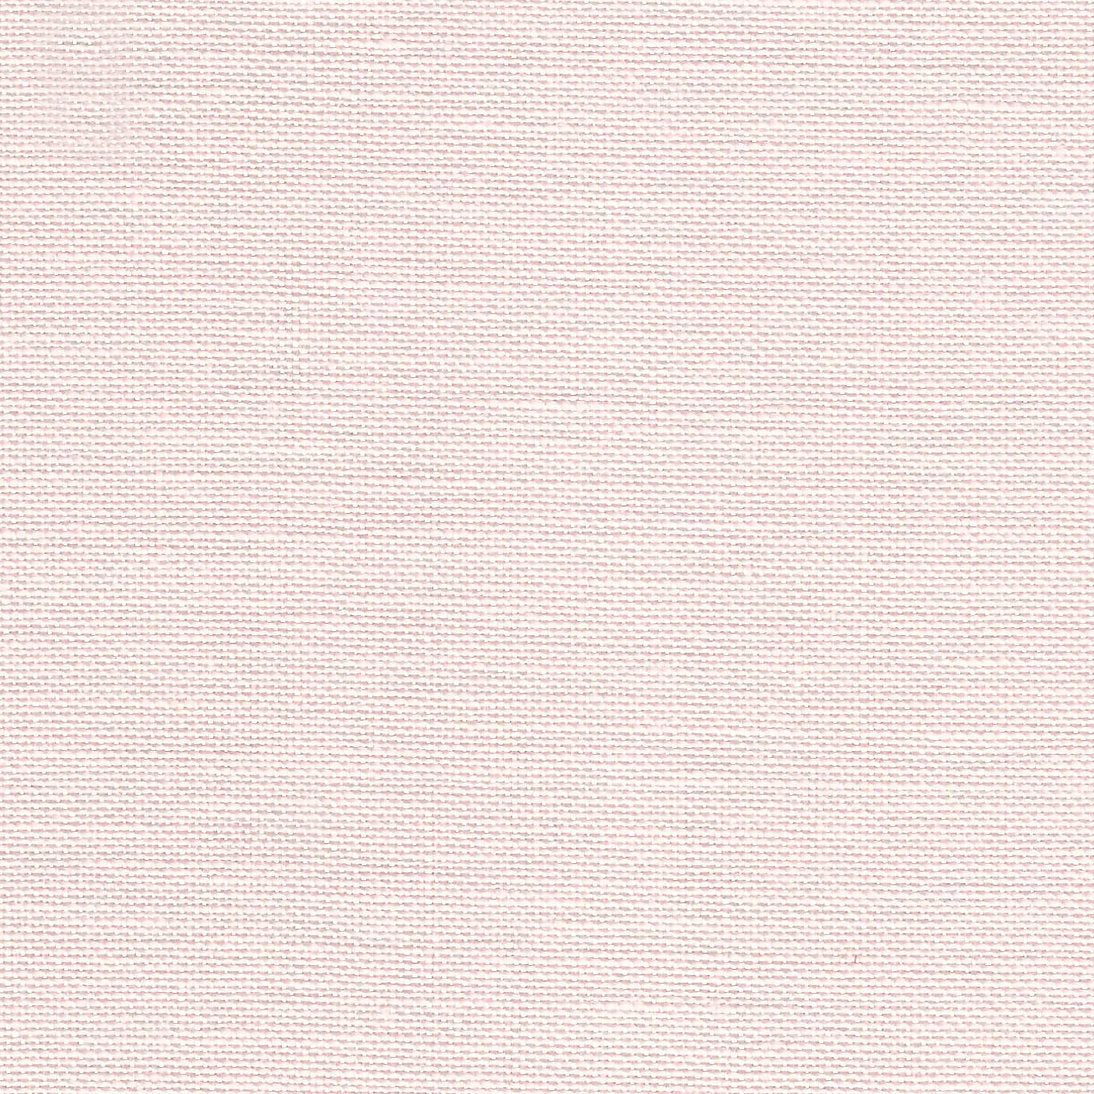 Belfast fabric 32 ct. Rose Blush by ZWEIGART 3609/4115 - 100% Fine Linen for Delicate Embroidery